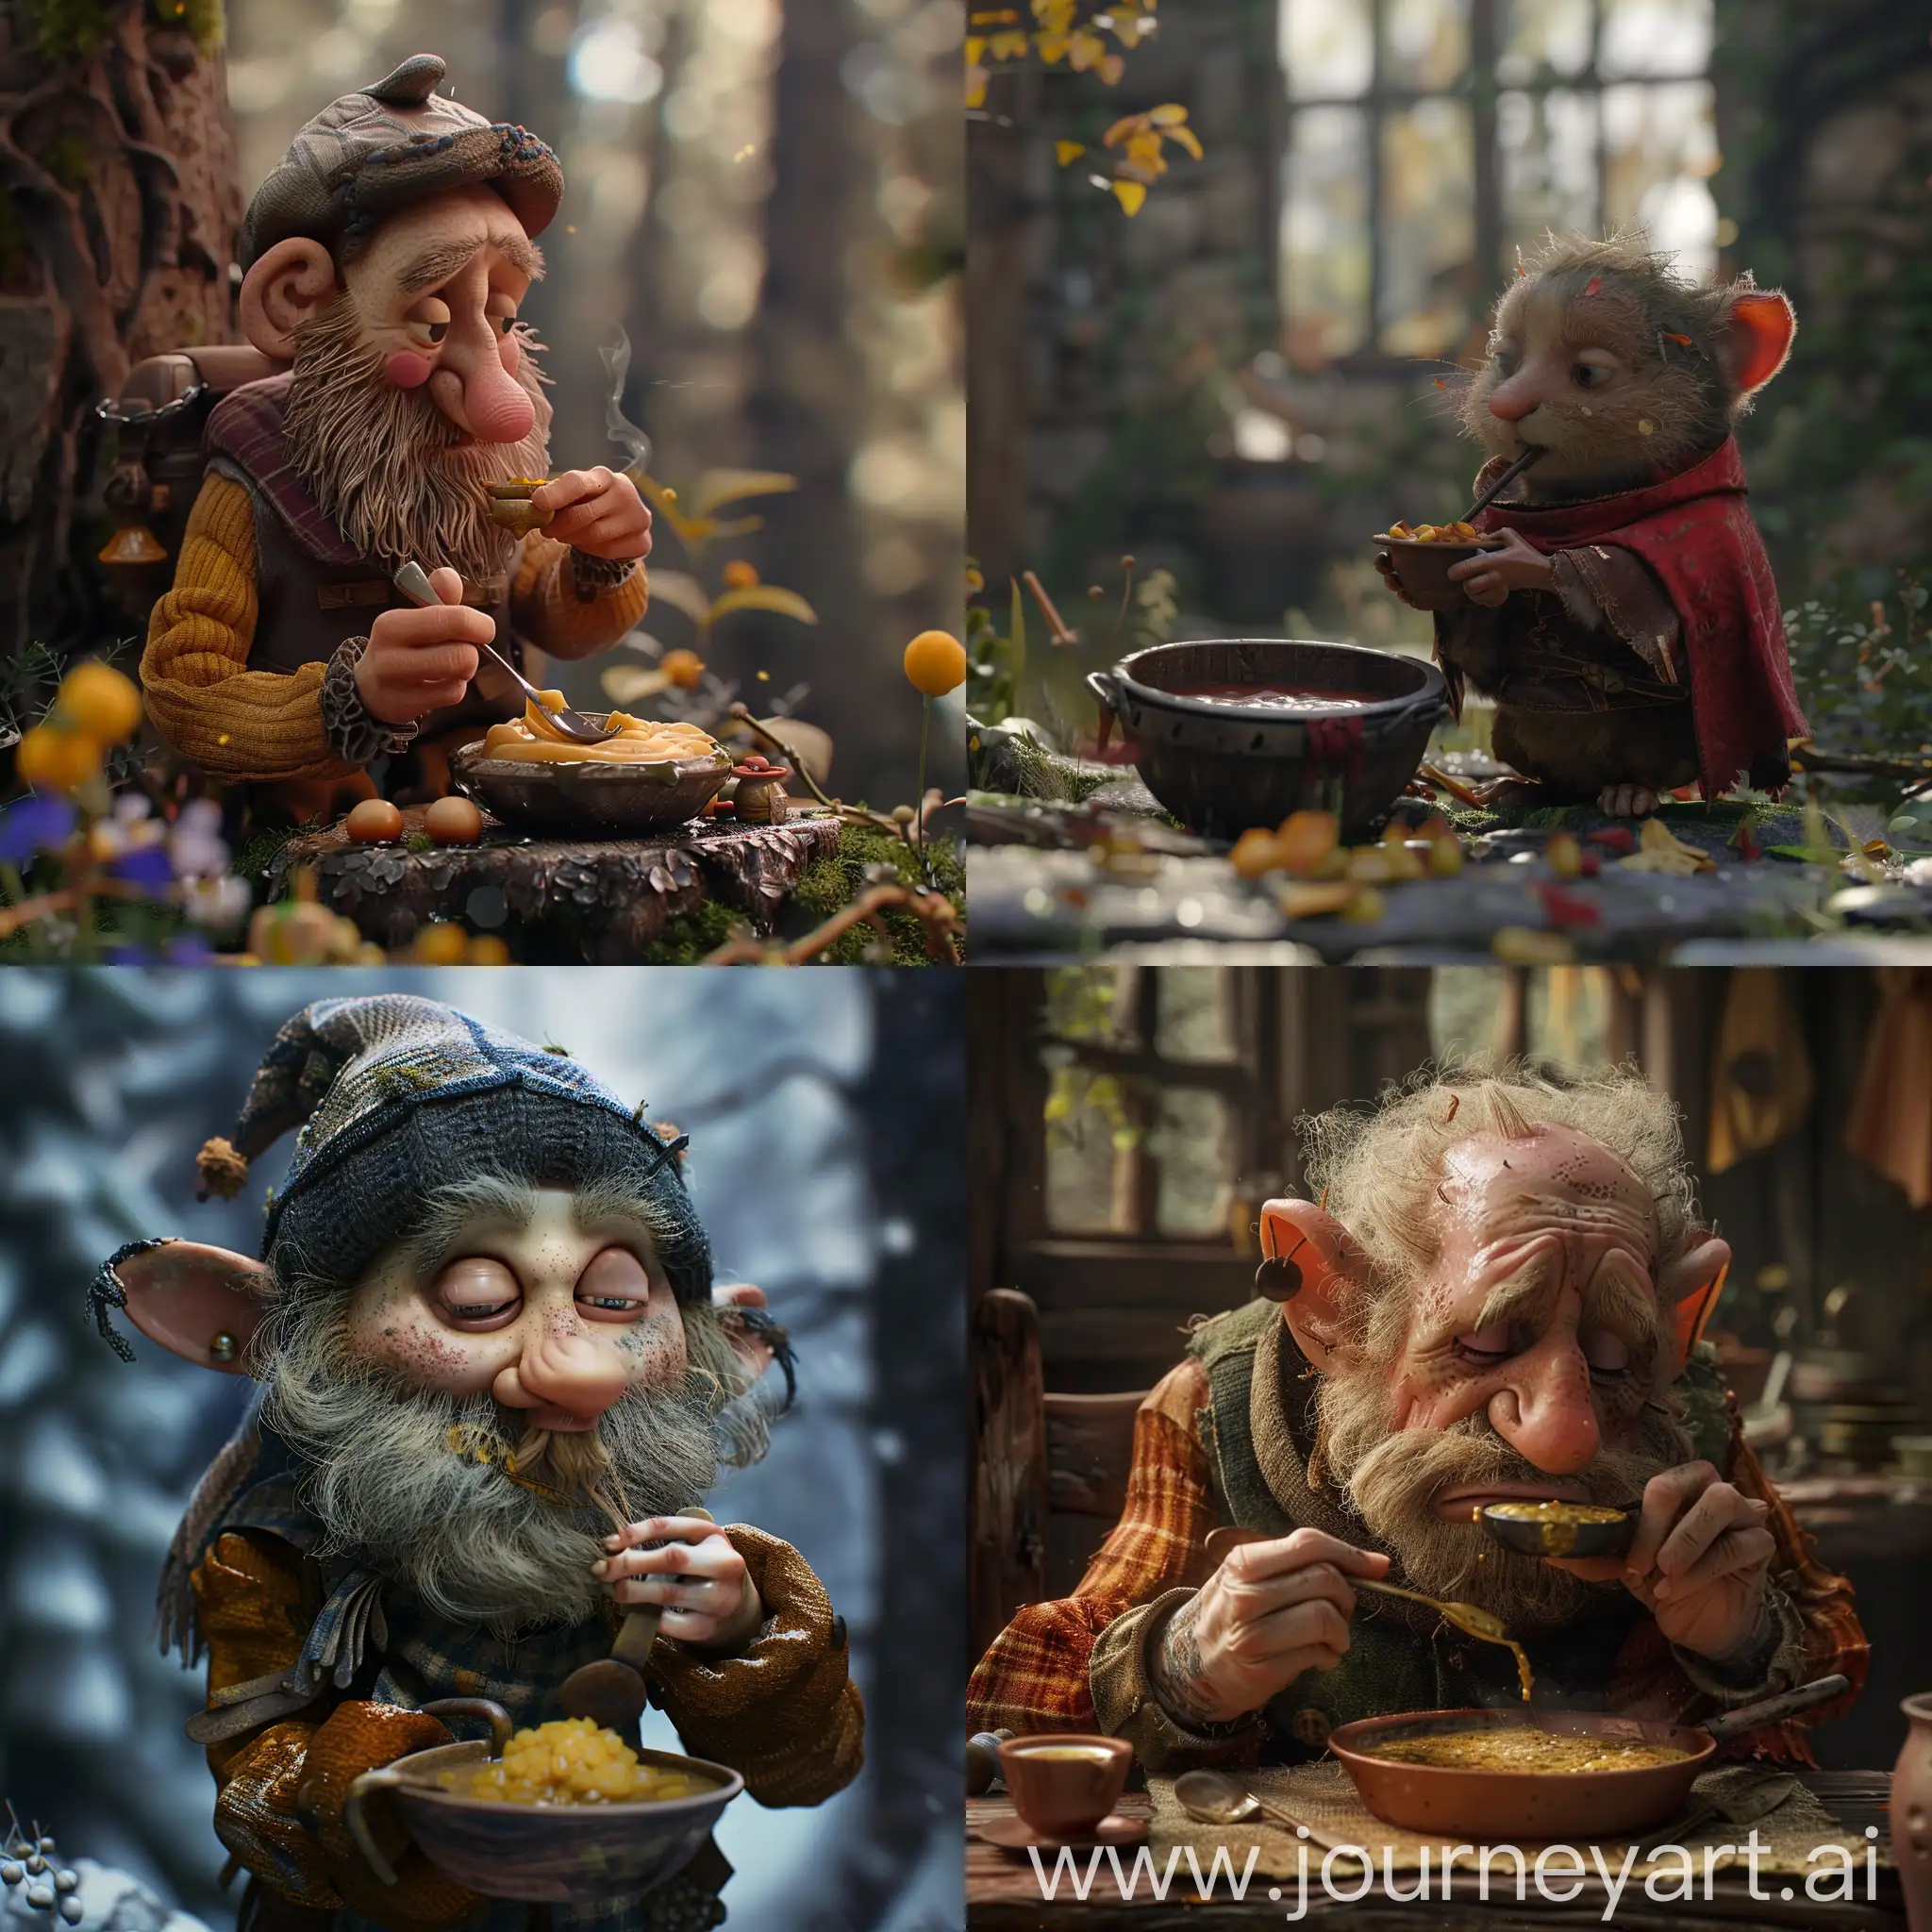 Woodcutter-Eating-Porridge-Wholesome-3D-Animation